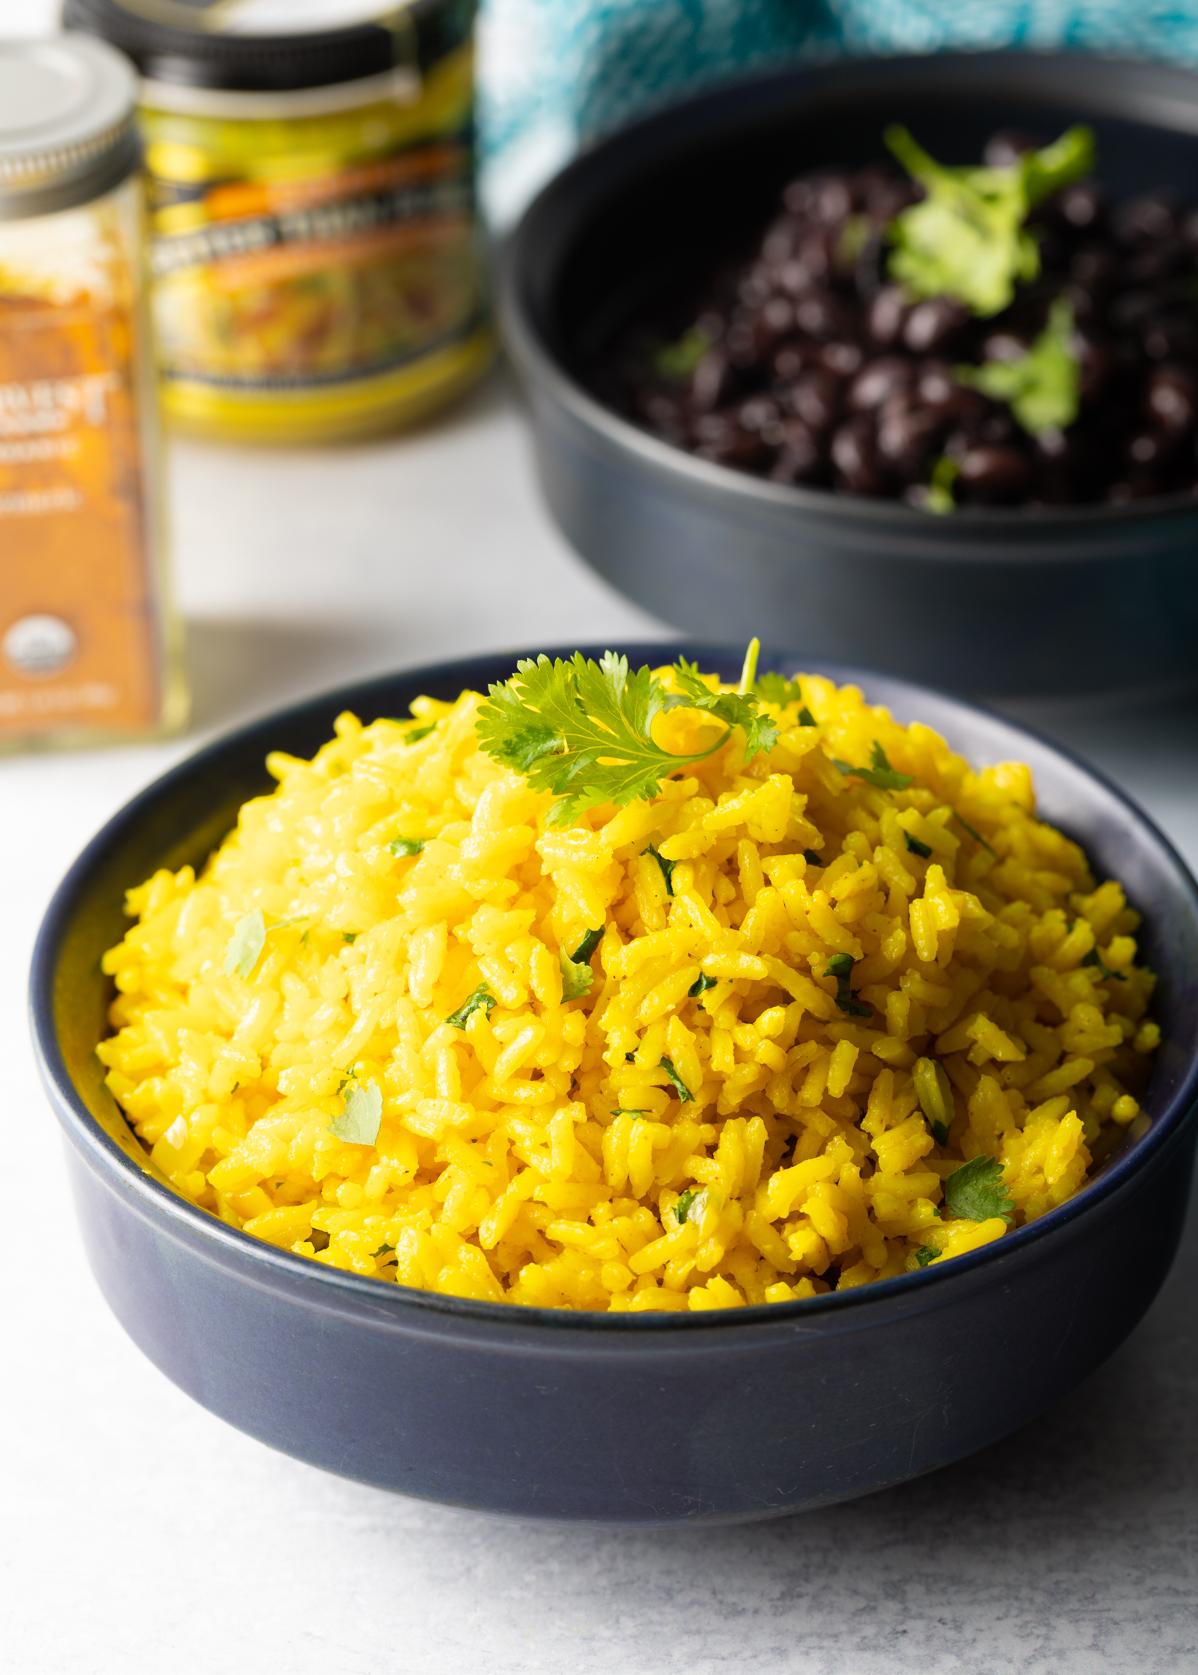  Perfectly cooked yellow rice kissed with saffron, topped with earthy peas - heaven on a plate